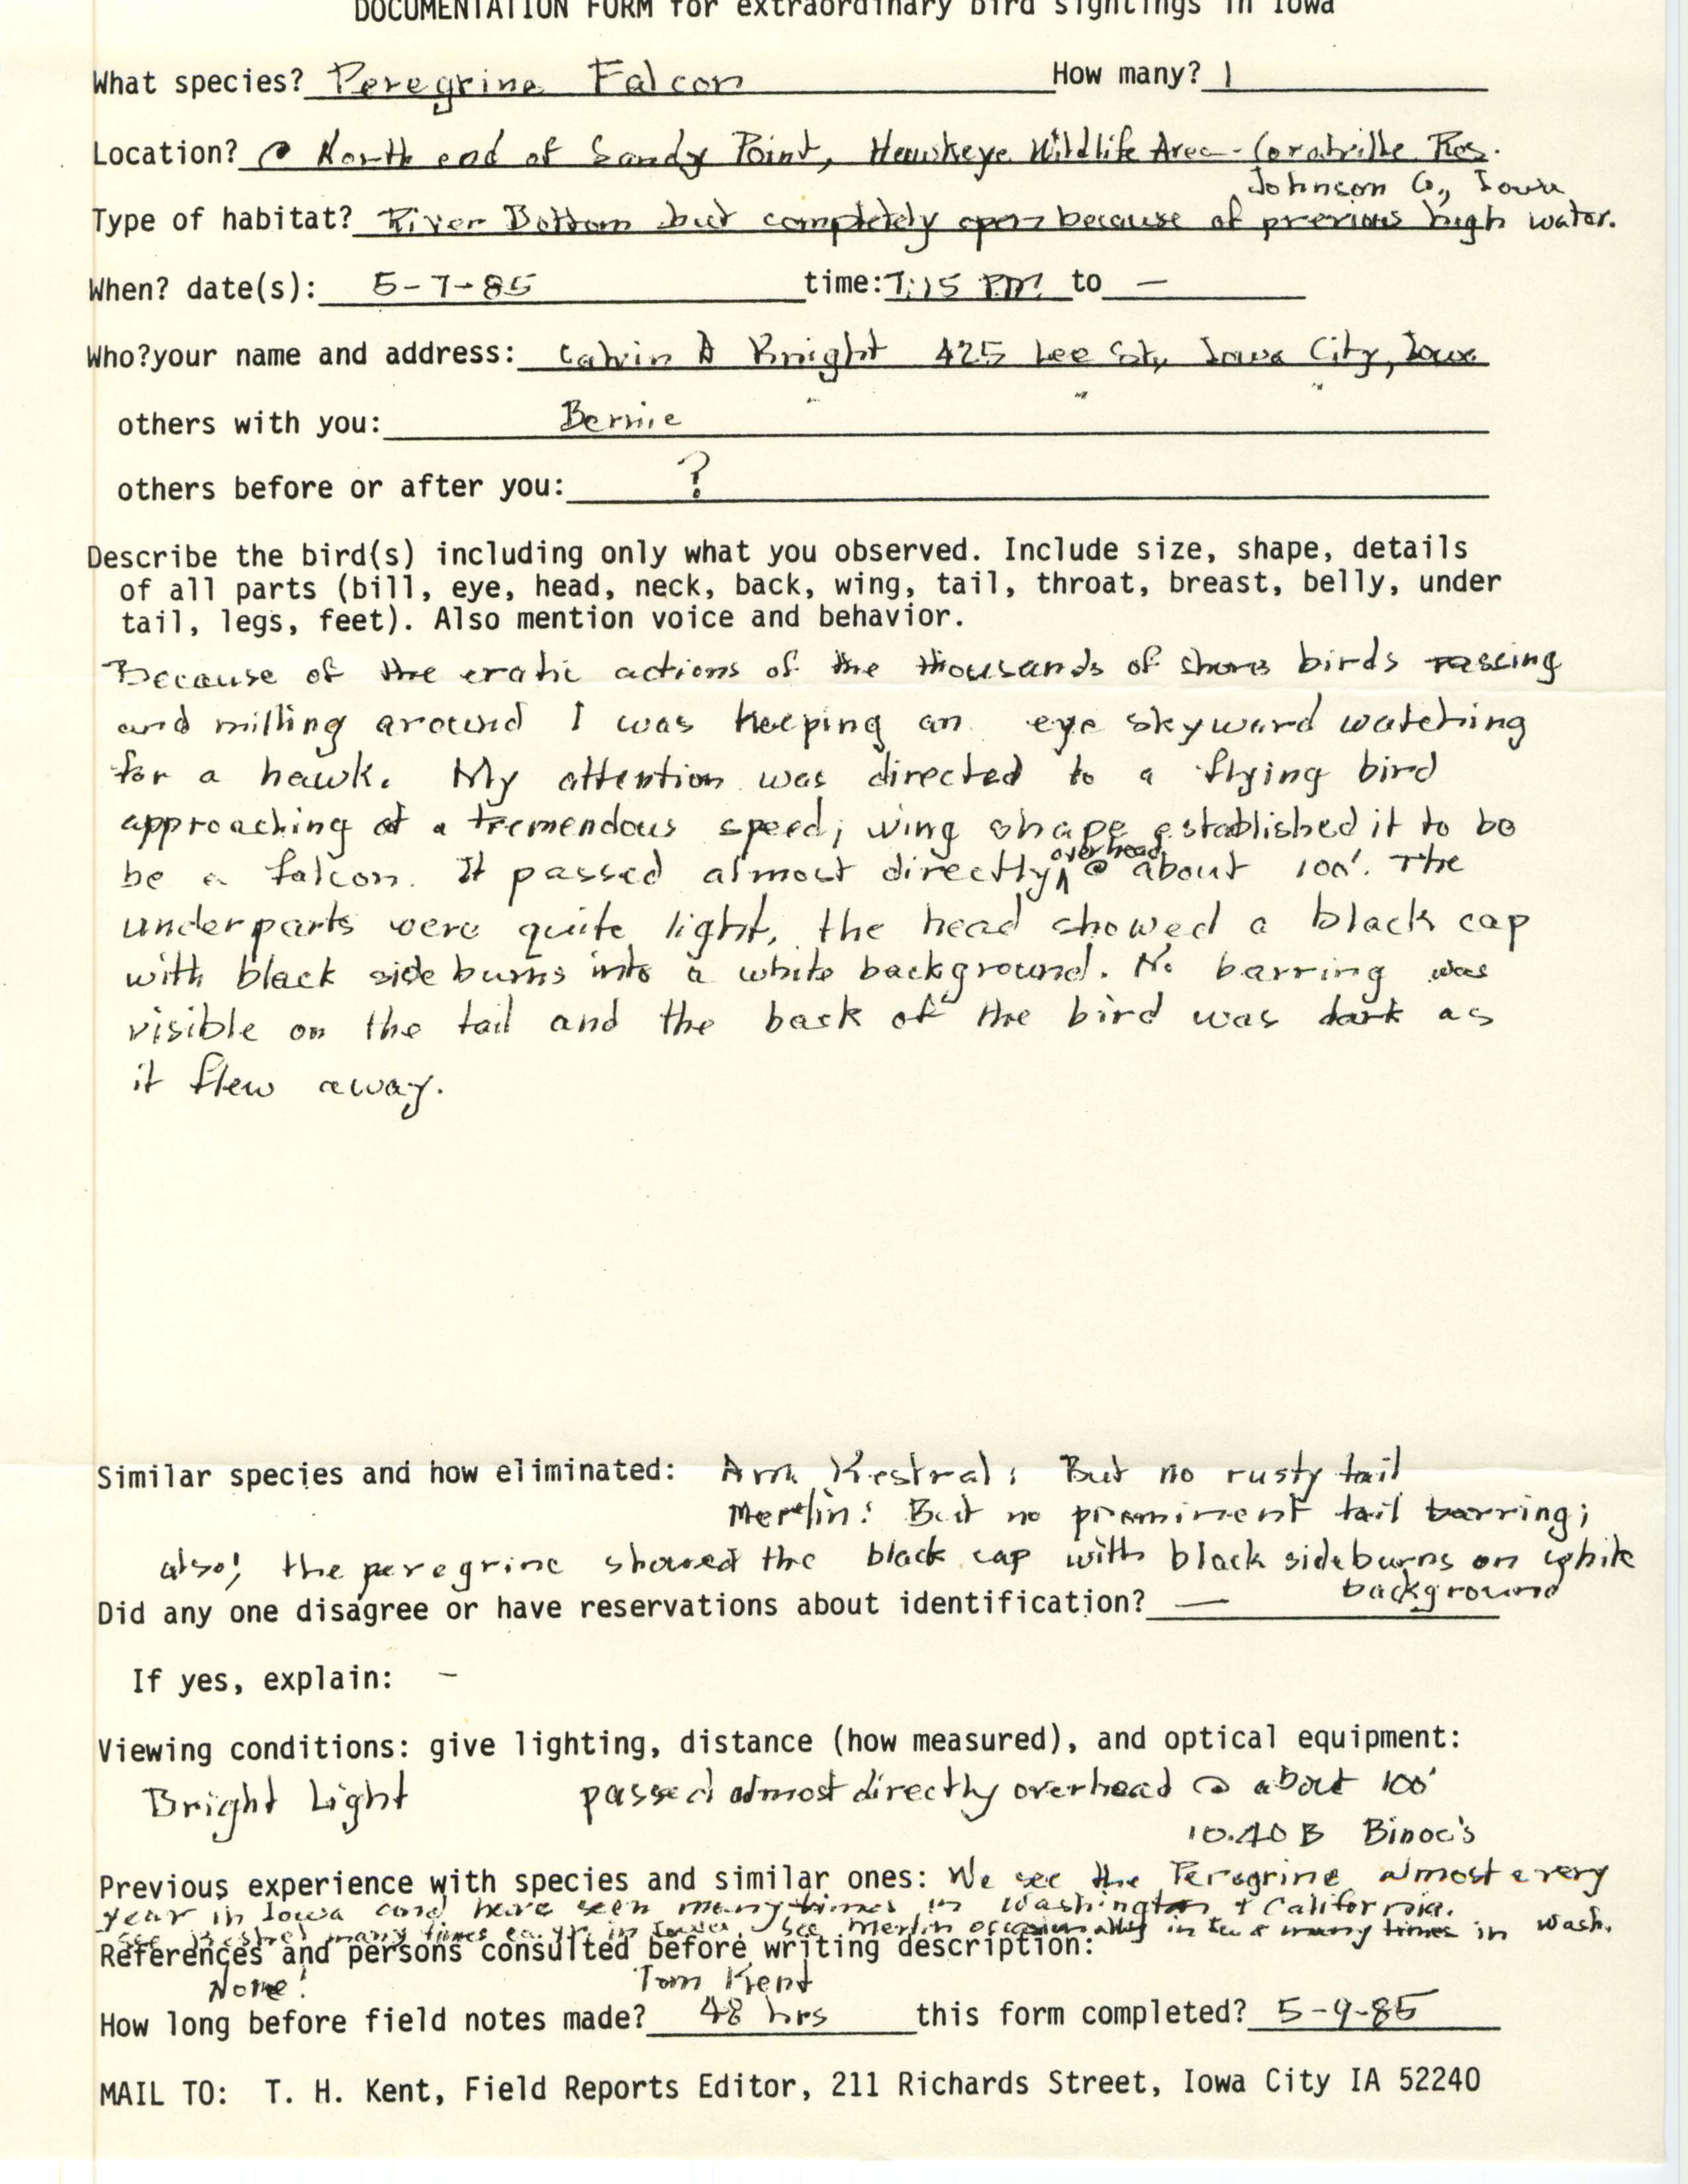 Rare bird documentation form for Peregrine Falcon at Sand Point in Hawkeye Wildlife Area, 1985